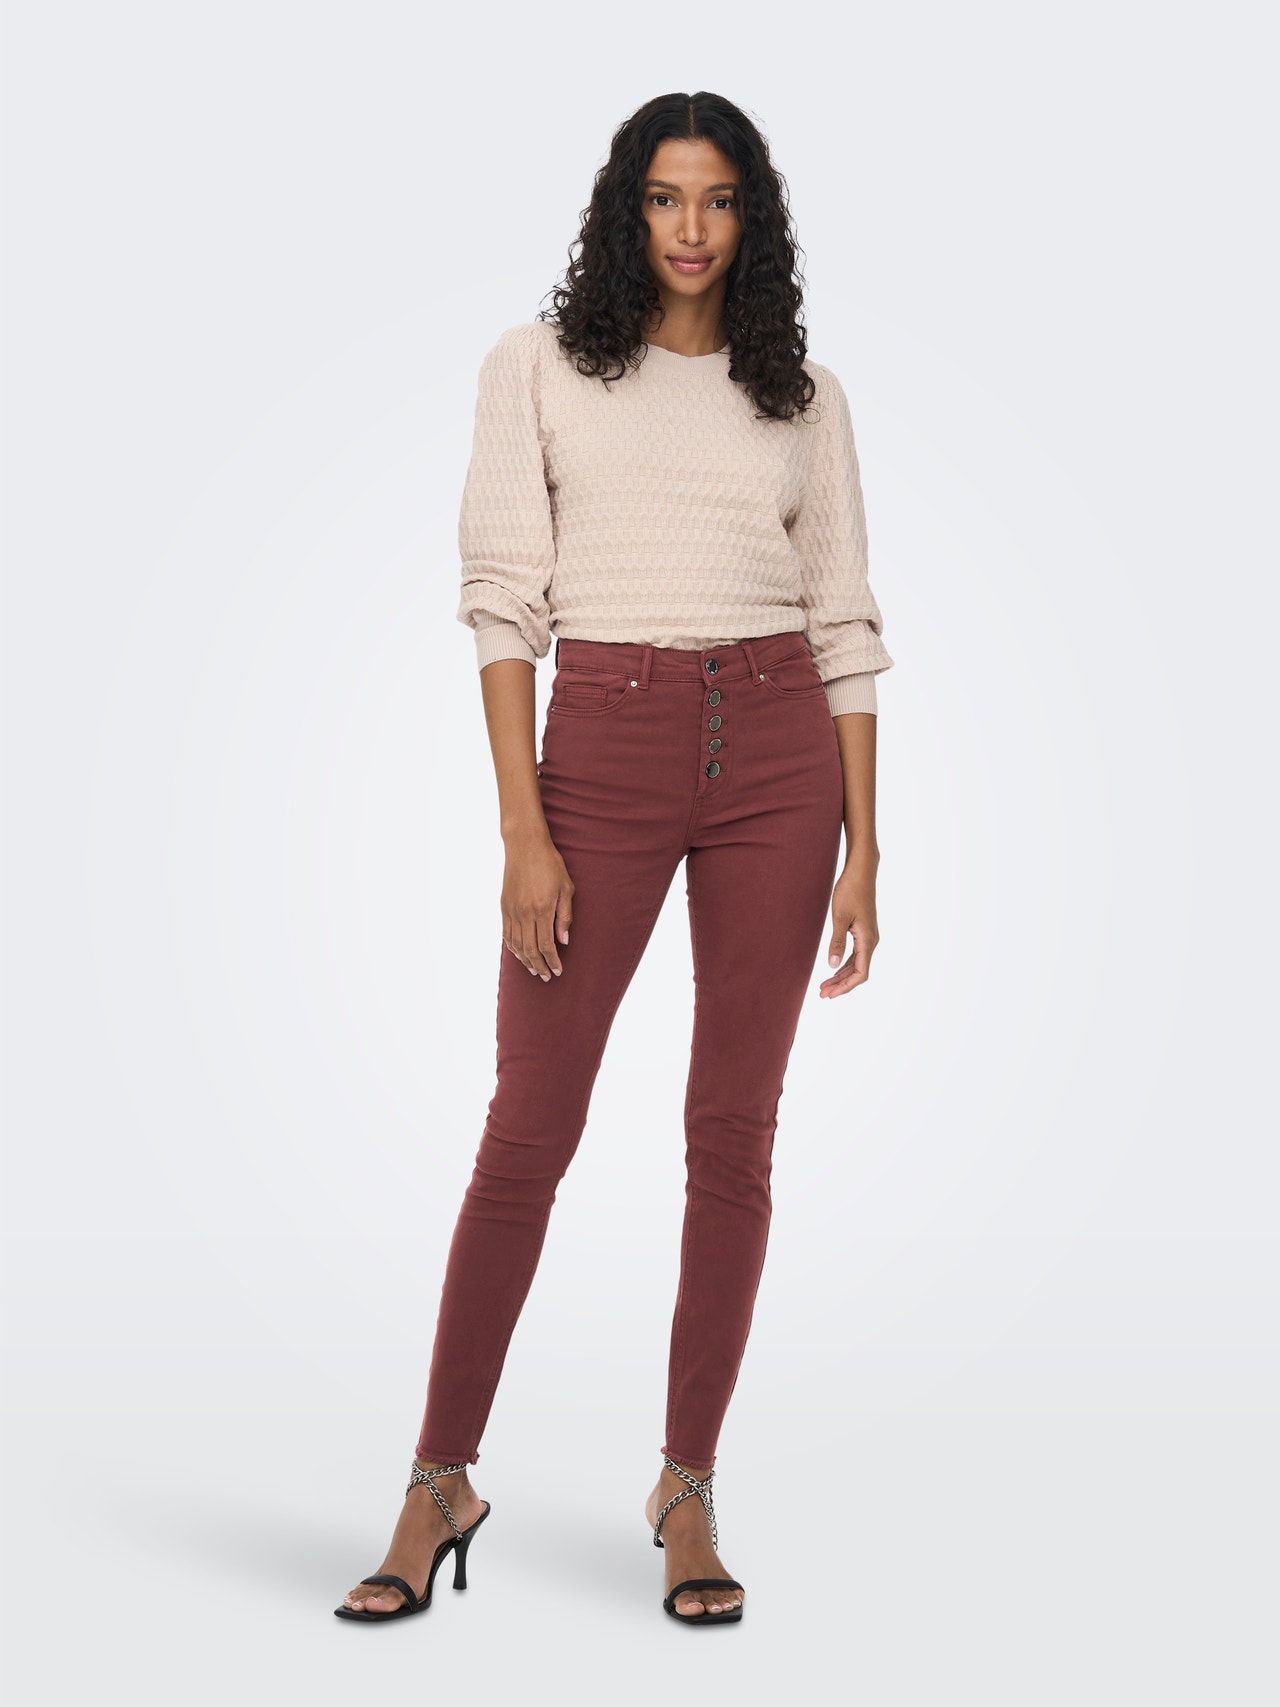 ONLY Pantalons Skinny Fit -Spiced Apple - 15264876